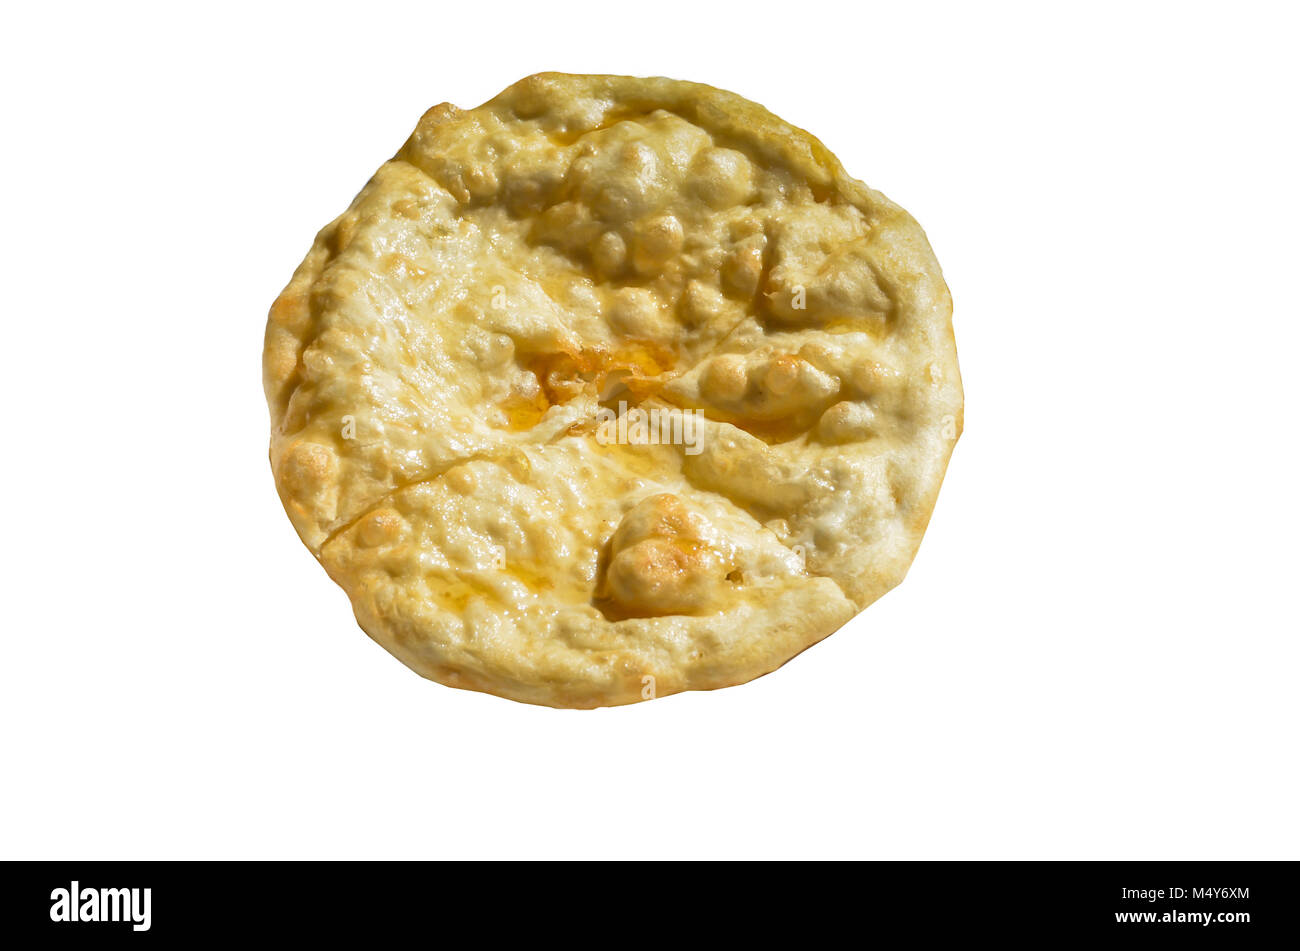 Isolated fry bread on white background. Stock Photo